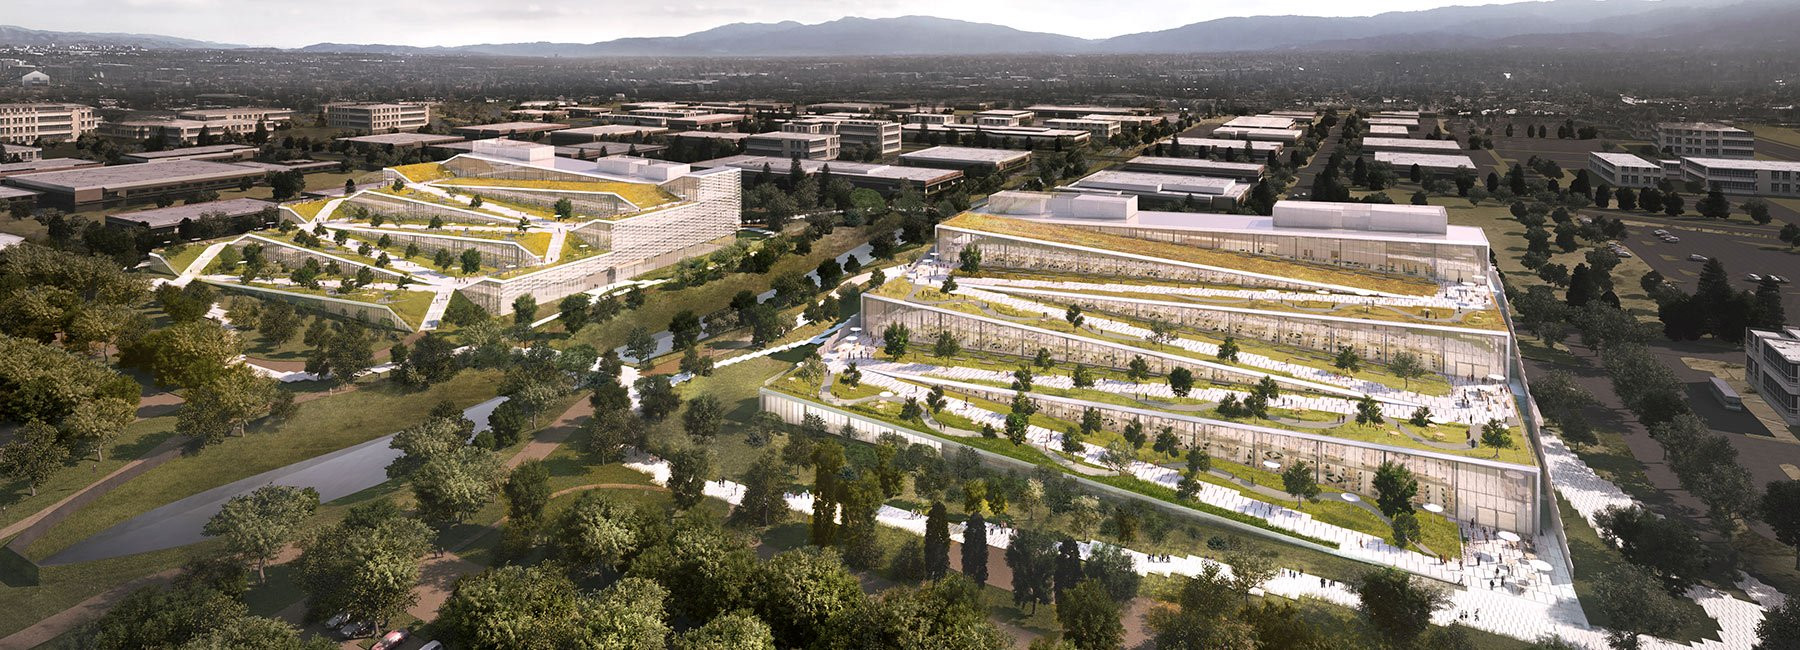 Terrace Landscape California
 BIG plans google campus in california with terraced roofscapes